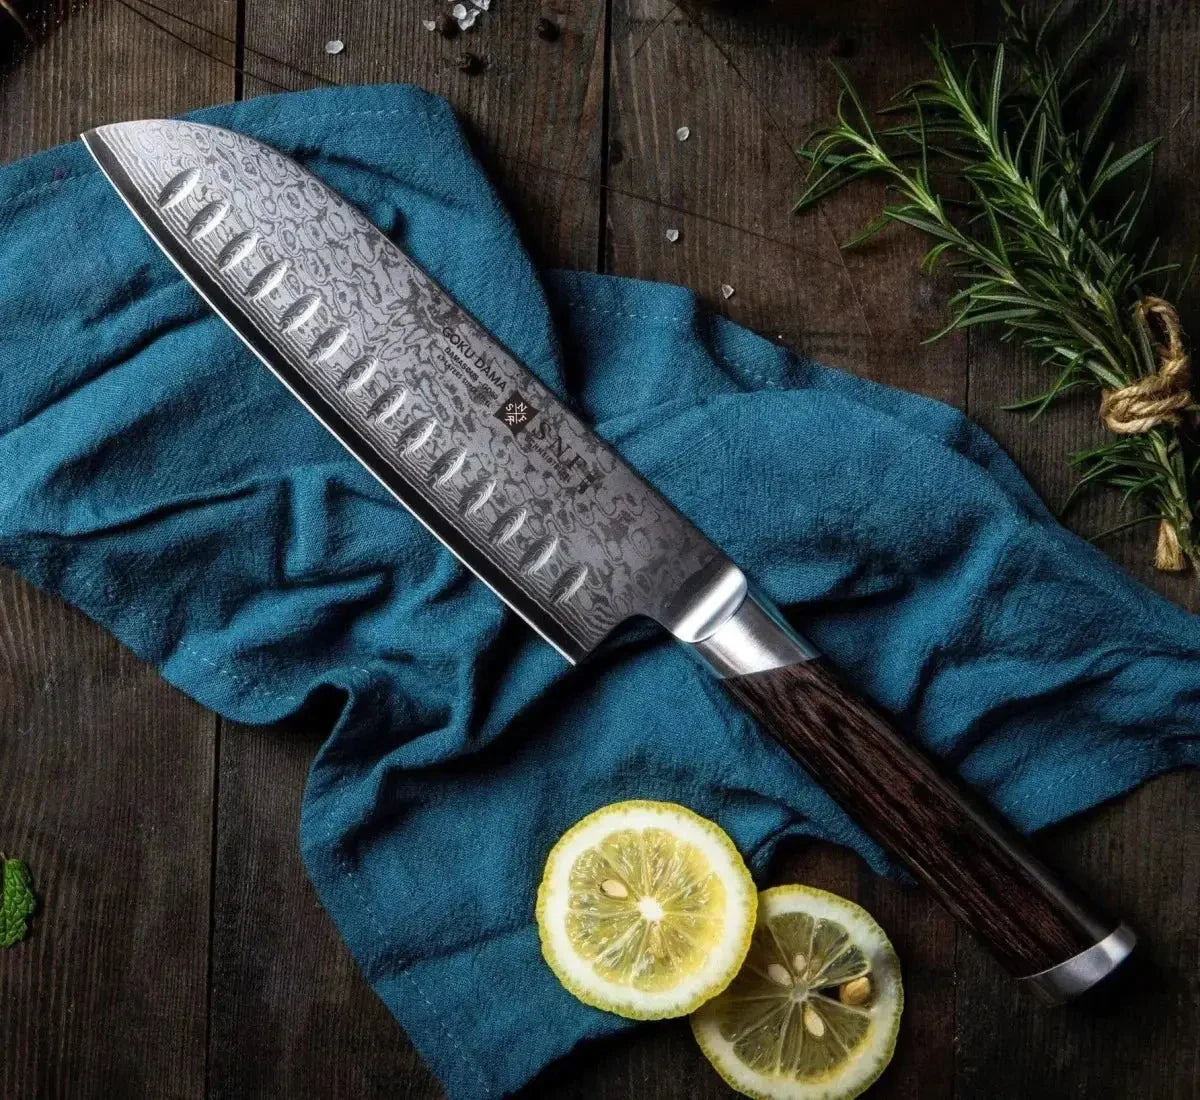 SNF Schneidteufel: The Rising Star in the World of Kitchen Knives